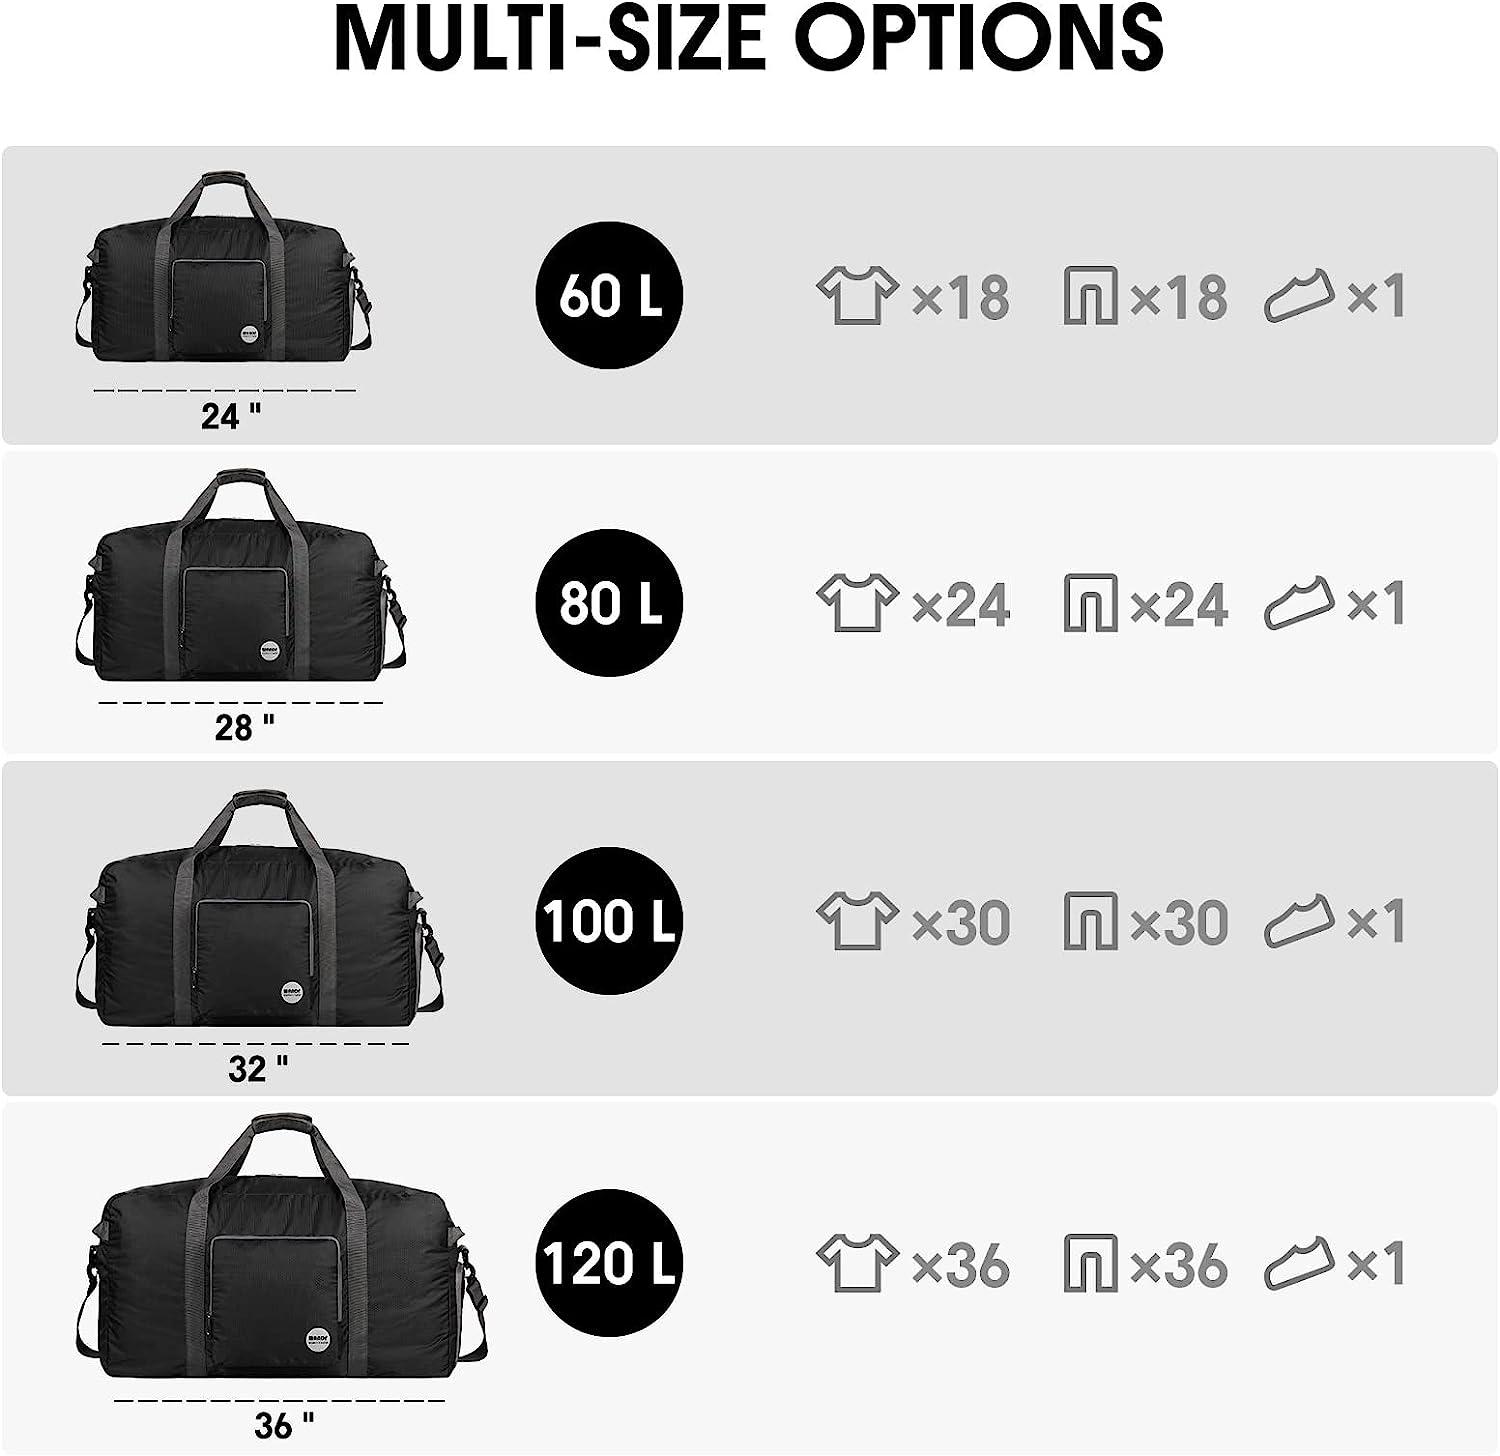 Foldable Duffle Bag 24 28 32 36 60L 80L 100L 120L for Travel Gym Sports  Lightweight Luggage Duffel By WANDF Black 60 Liter 24 inches (60 Liter)